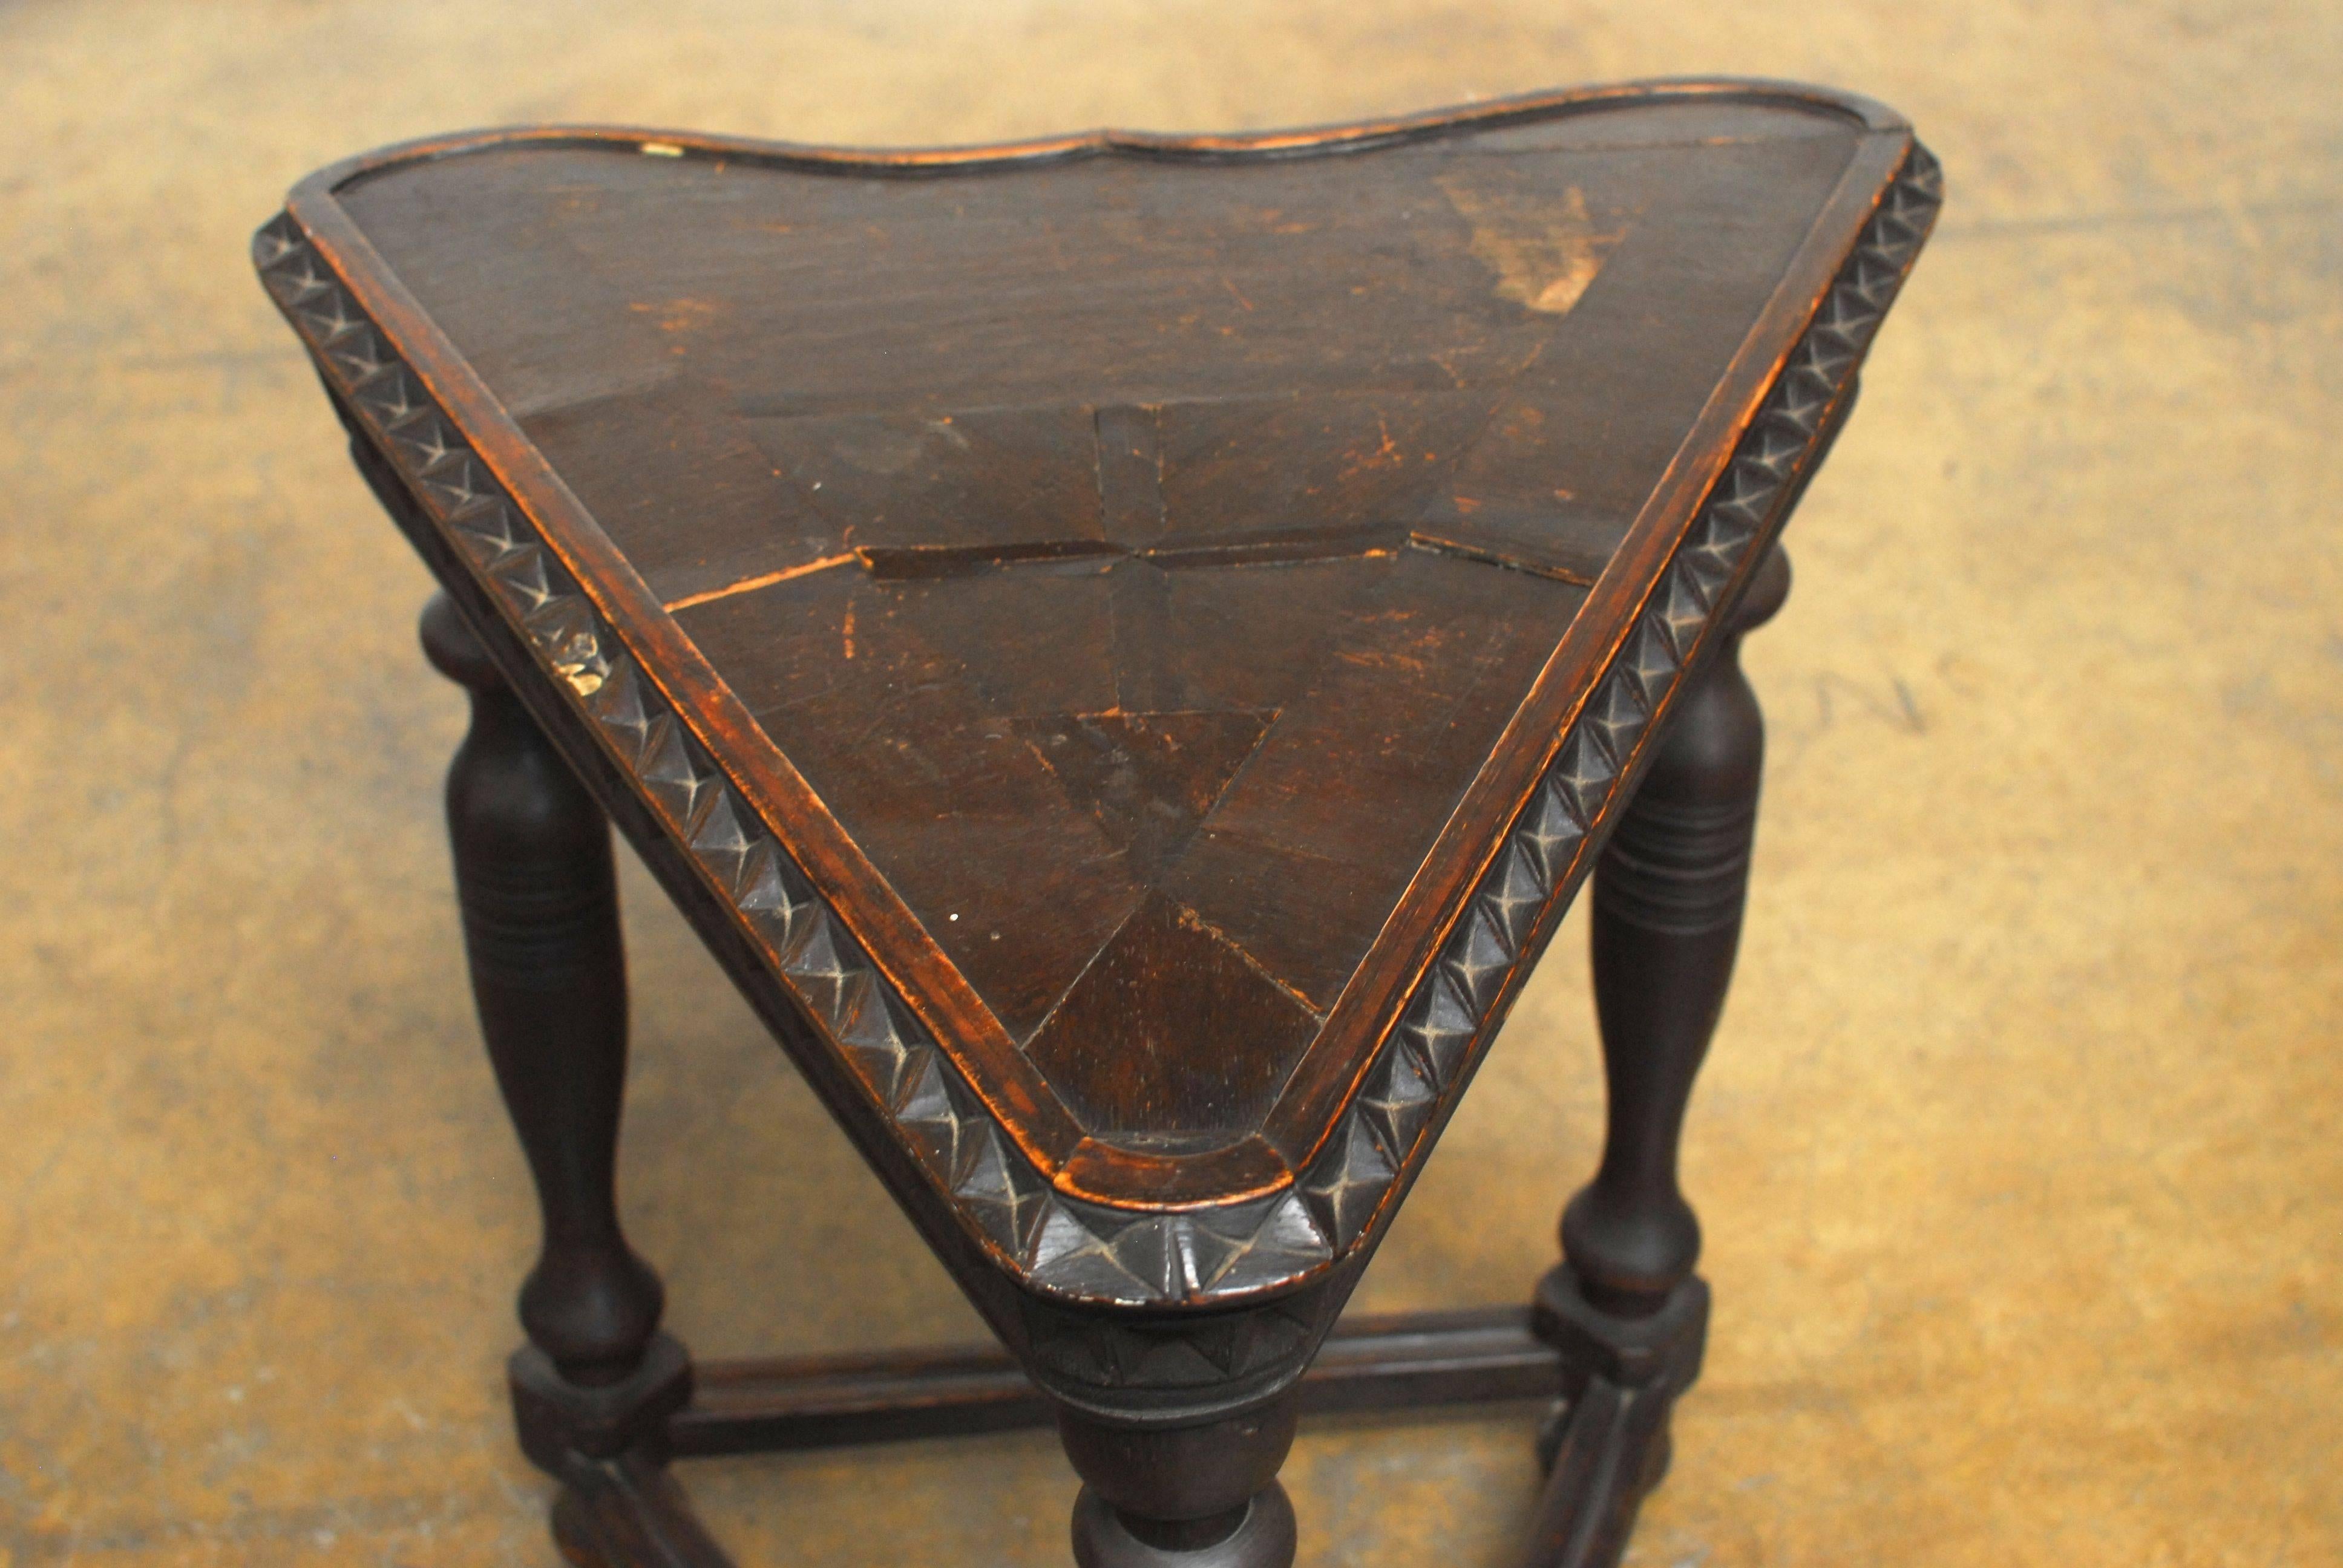 Gothic Triangular Table with a Heart-Shaped Top